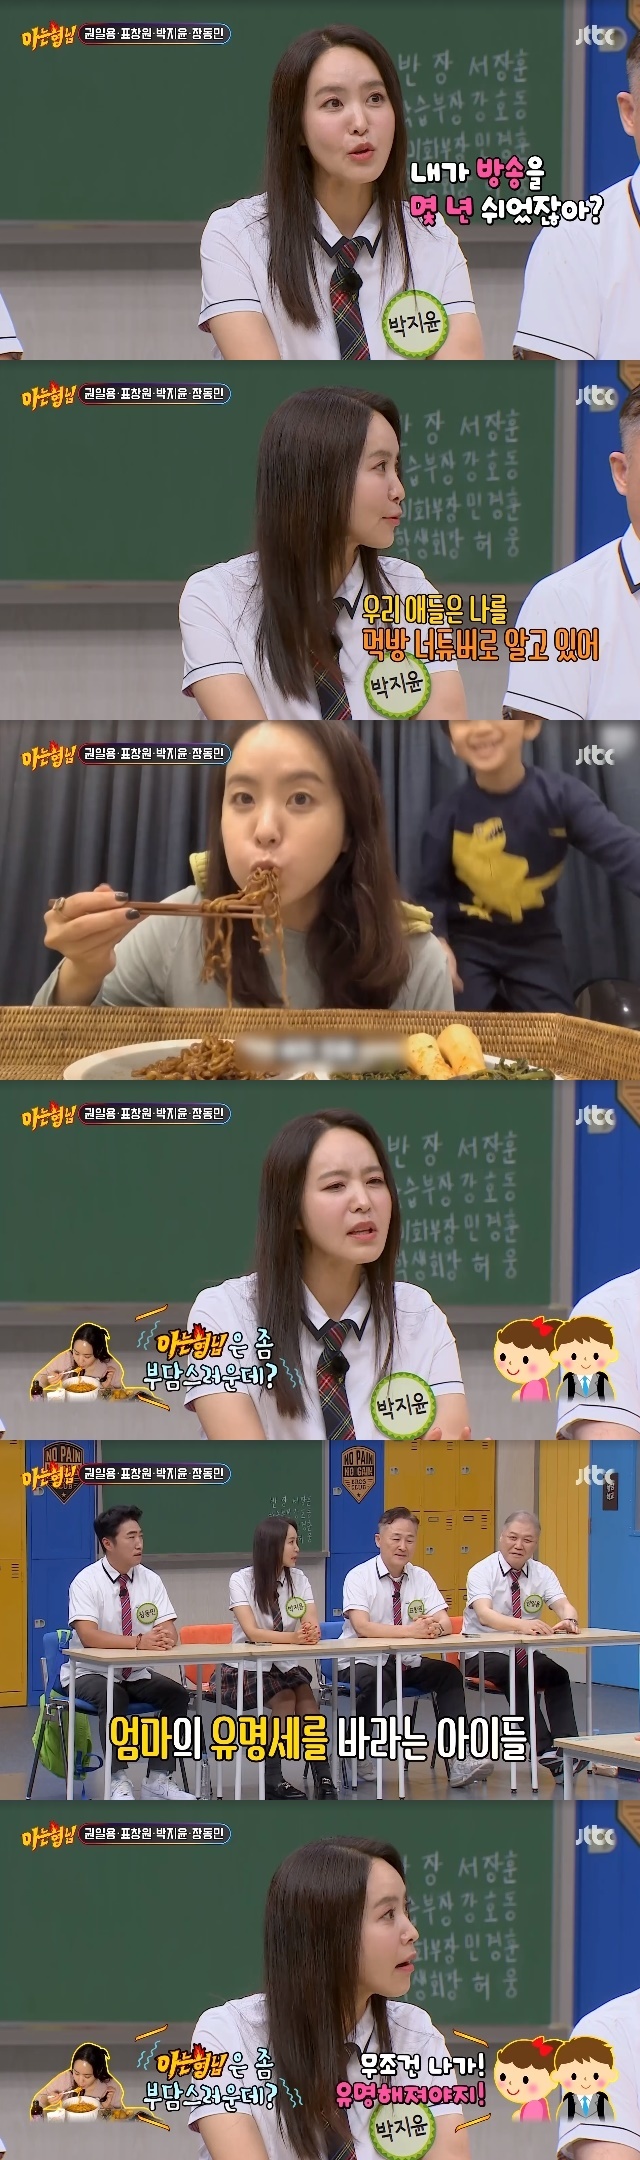 Park Ji-yoon, an announcer-born Broadcasting, conveyed his childs laughing misunderstanding.For Kwon Il-yong, Pyo Chang-won, Park Ji-yoon, and Jang Dong-min were transferred to your brothers school in the 398th JTBC entertainment Knowing Bros (hereinafter known as Knowing Bros) broadcasted on August 26th.Park Ji-yoon said, I was able to appear on Knowing Bros because I was pushed back by my children. I took a few years off from Broadcasting. My last memory of my kids is me as a food tuber.When the children go to school, there is a desire that my mother should become more famous. I said that I was burdened, so I came out because I said, Why do not you go out? Park Ji-yoon said she was 10 years old and 14 years old when she asked her childrens age.Park Ji-yoon, who showed a delightful conversation in Knowing Bros according to the childrens wishes, said, I feel good because I think my children will shrug when I go out on broadcasting.